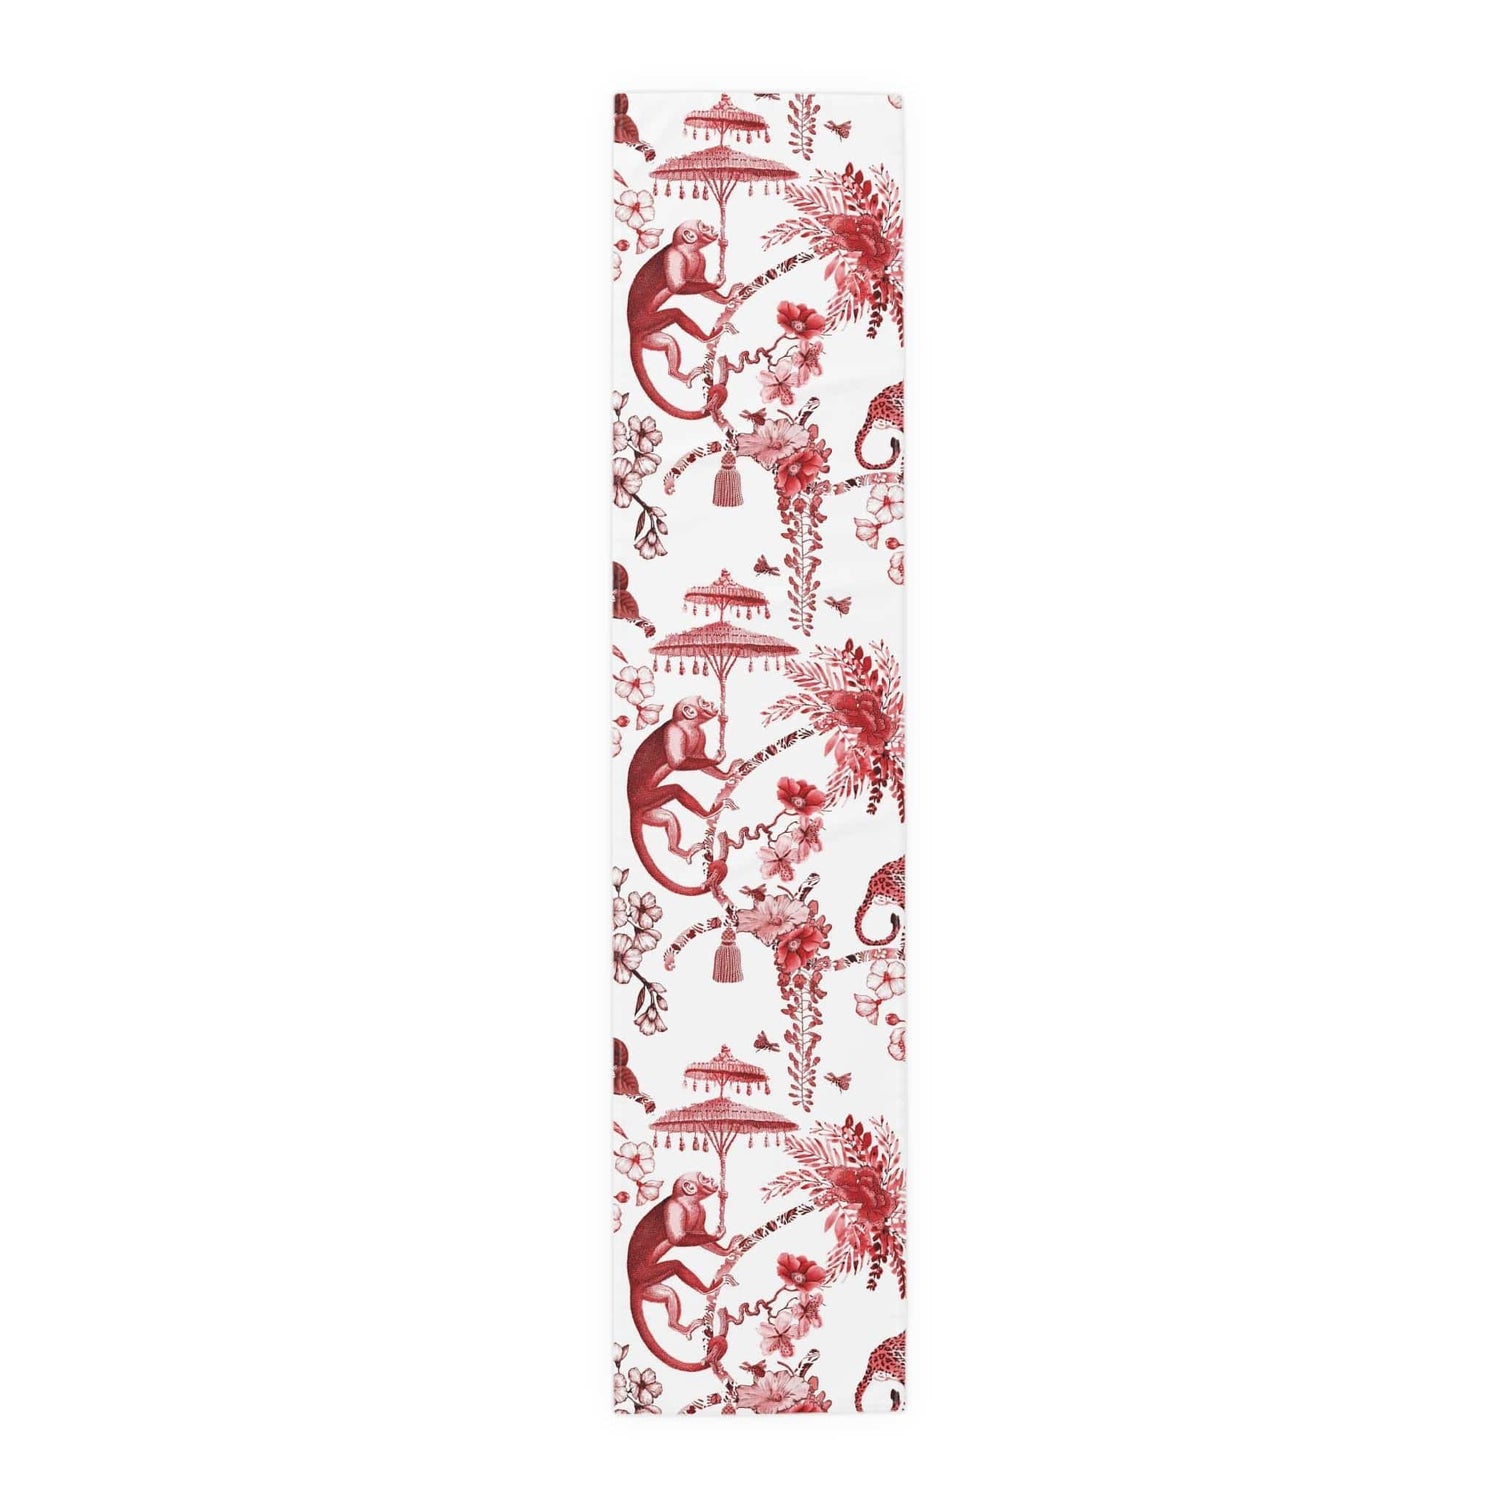 Kate McEnroe New York Chinoiserie Jungle Botanical Toile Table Runner, Red, White Chinoiserie Floral Table Linens , Country Farmhouse Table Decor - 131782623 Table Runners